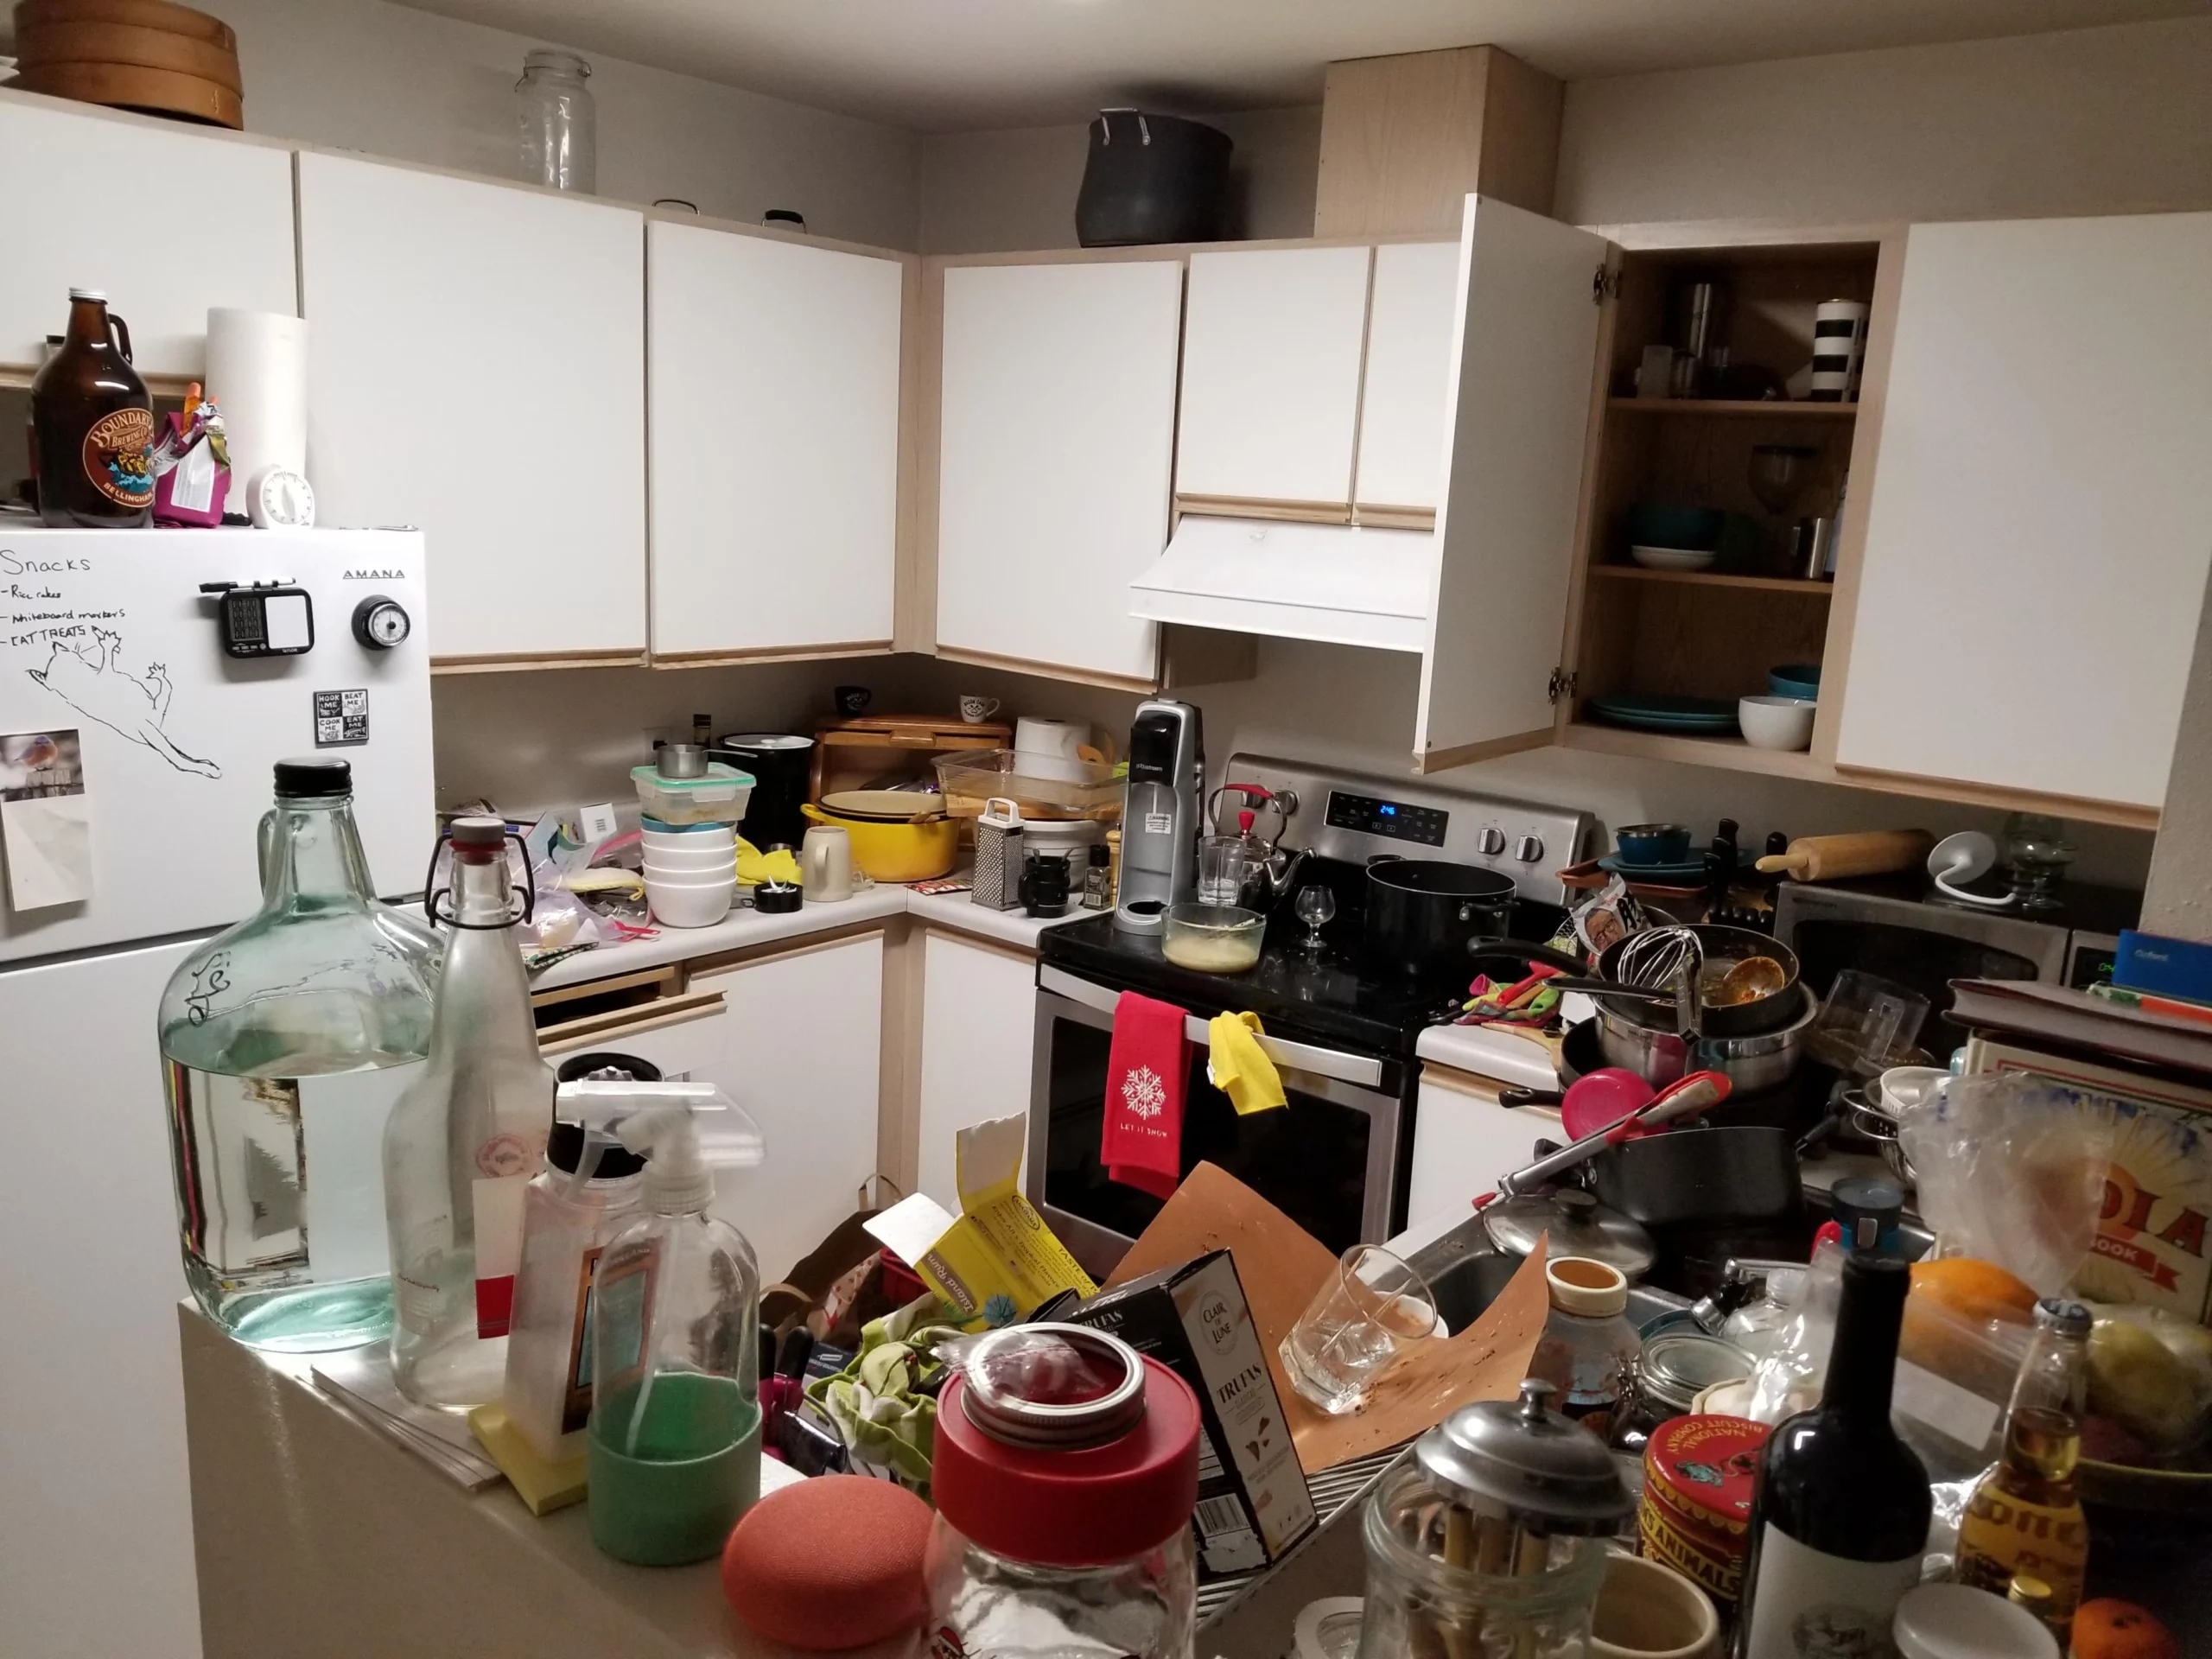 extremely messy and dirty kitchen with stuff all over the countertops.